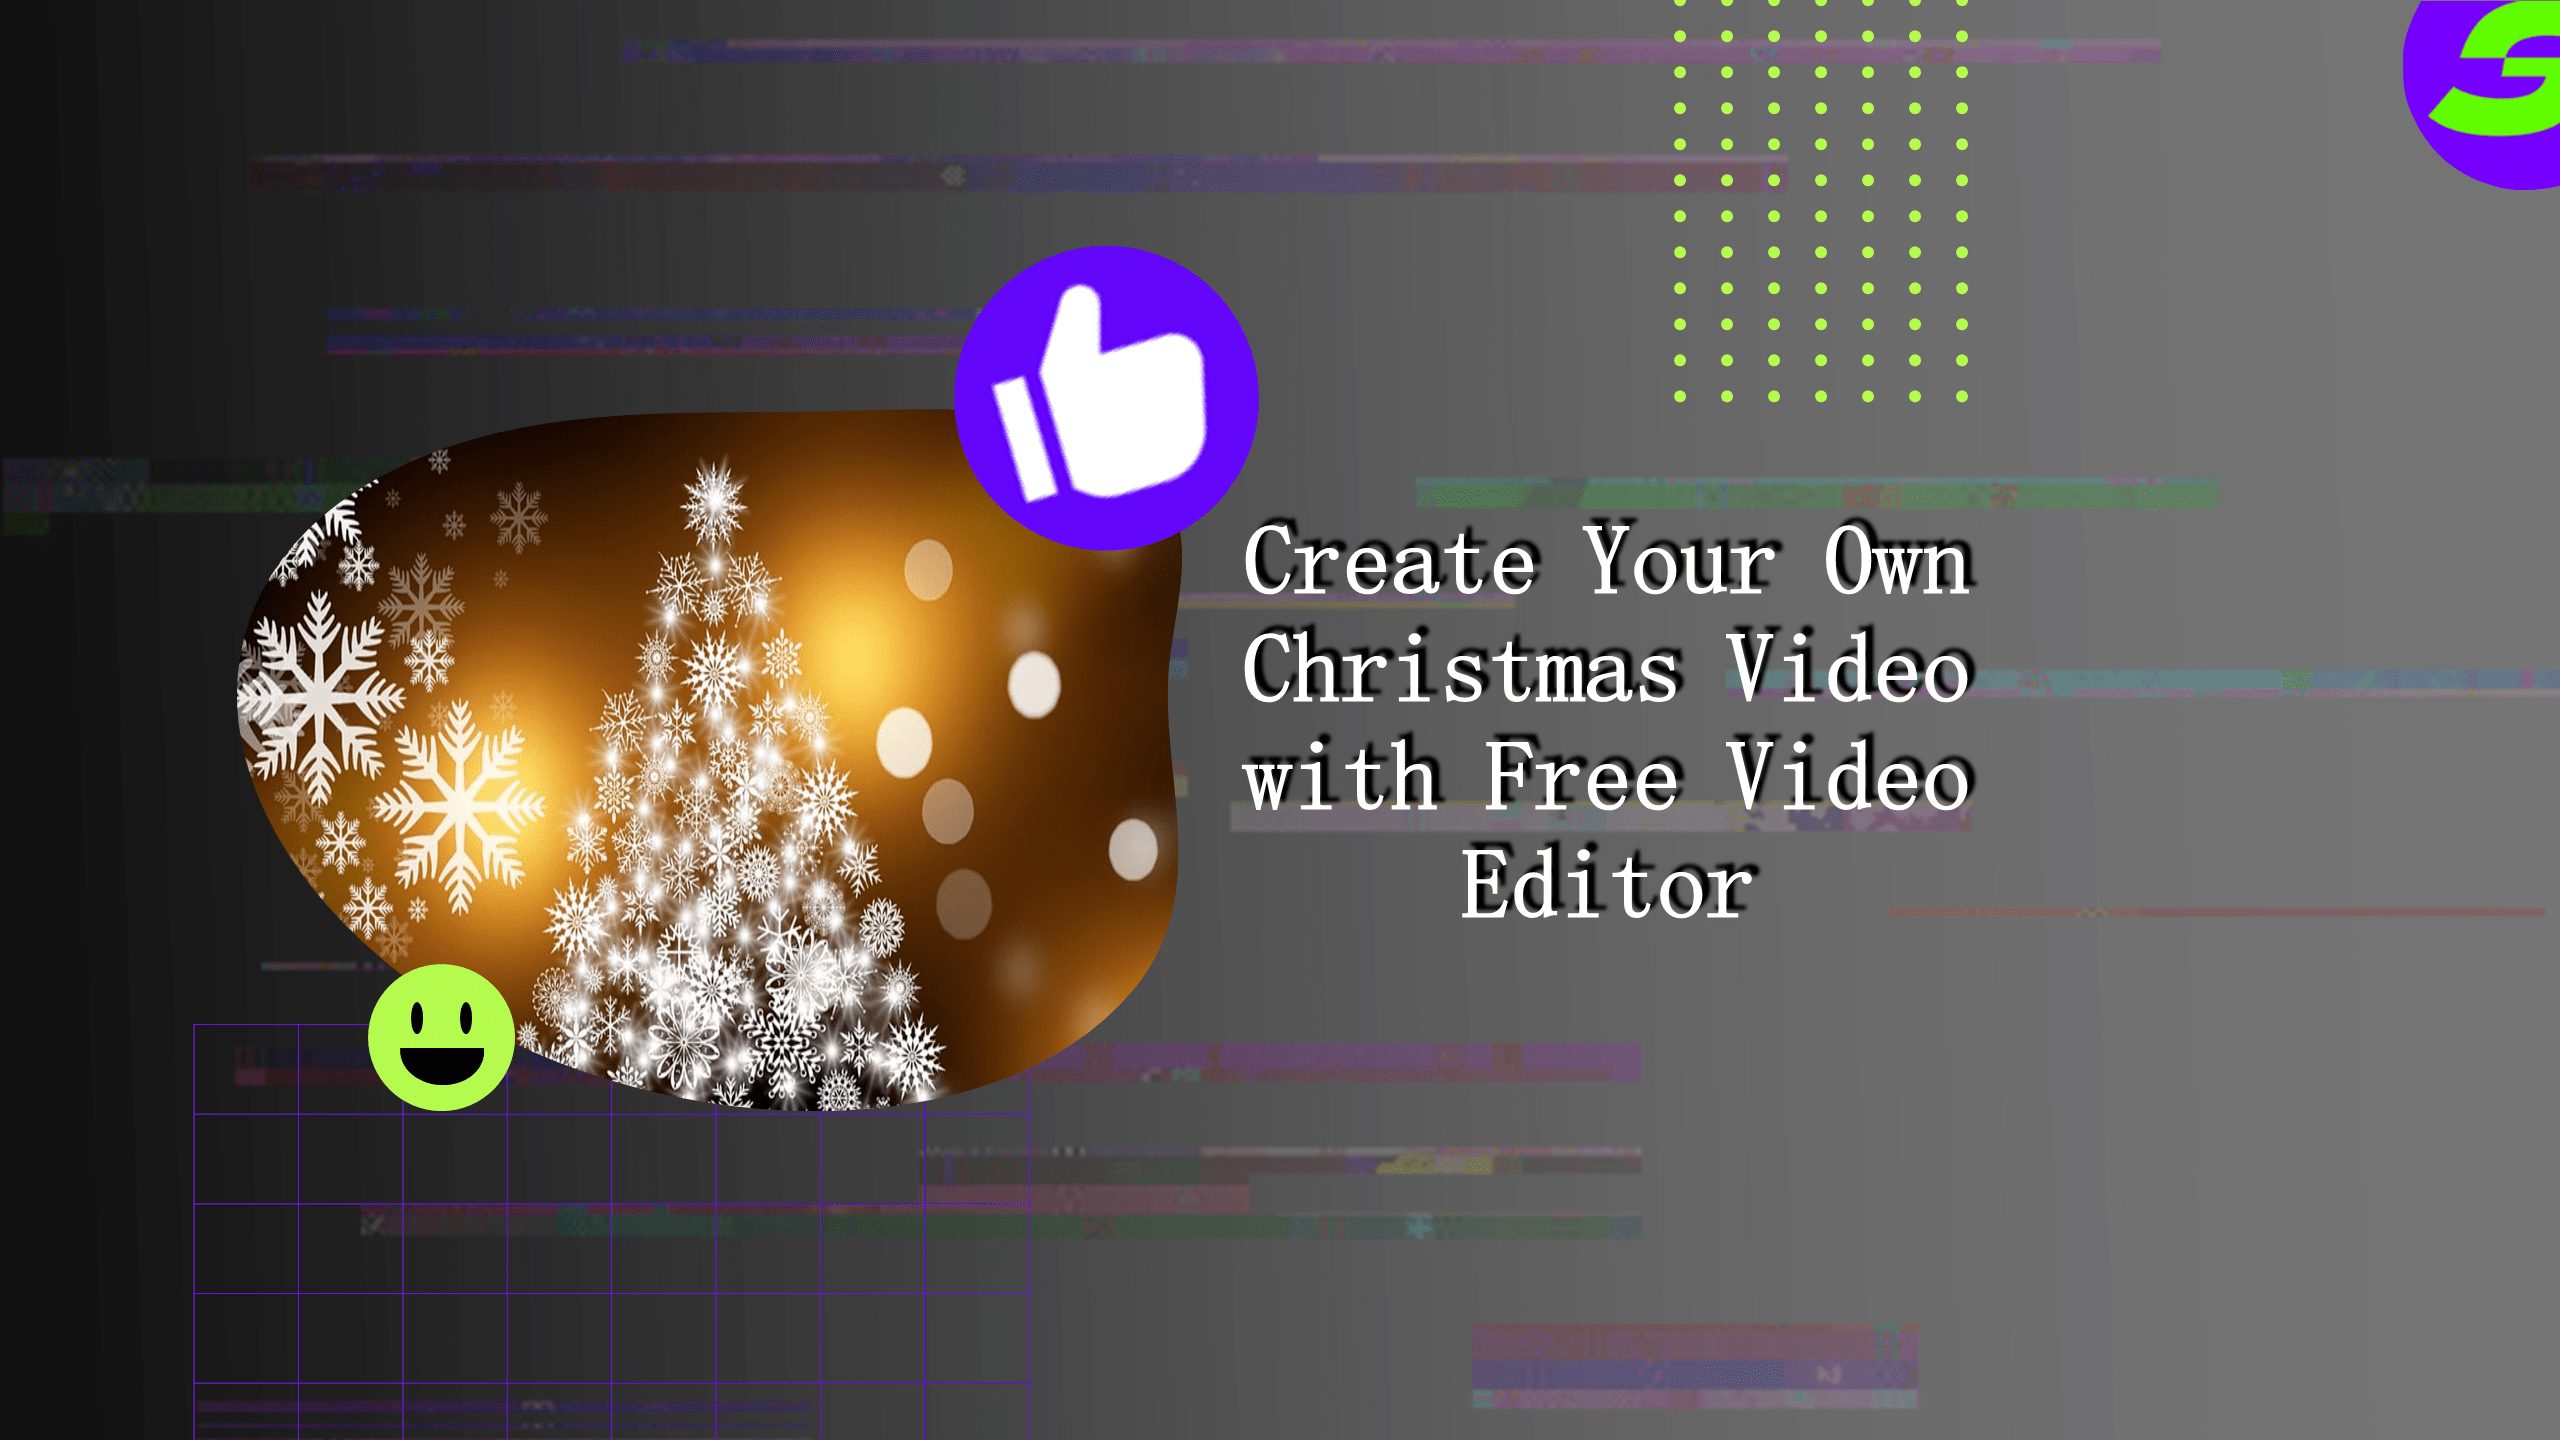 Create Your Own Christmas Video with Free Video Editor